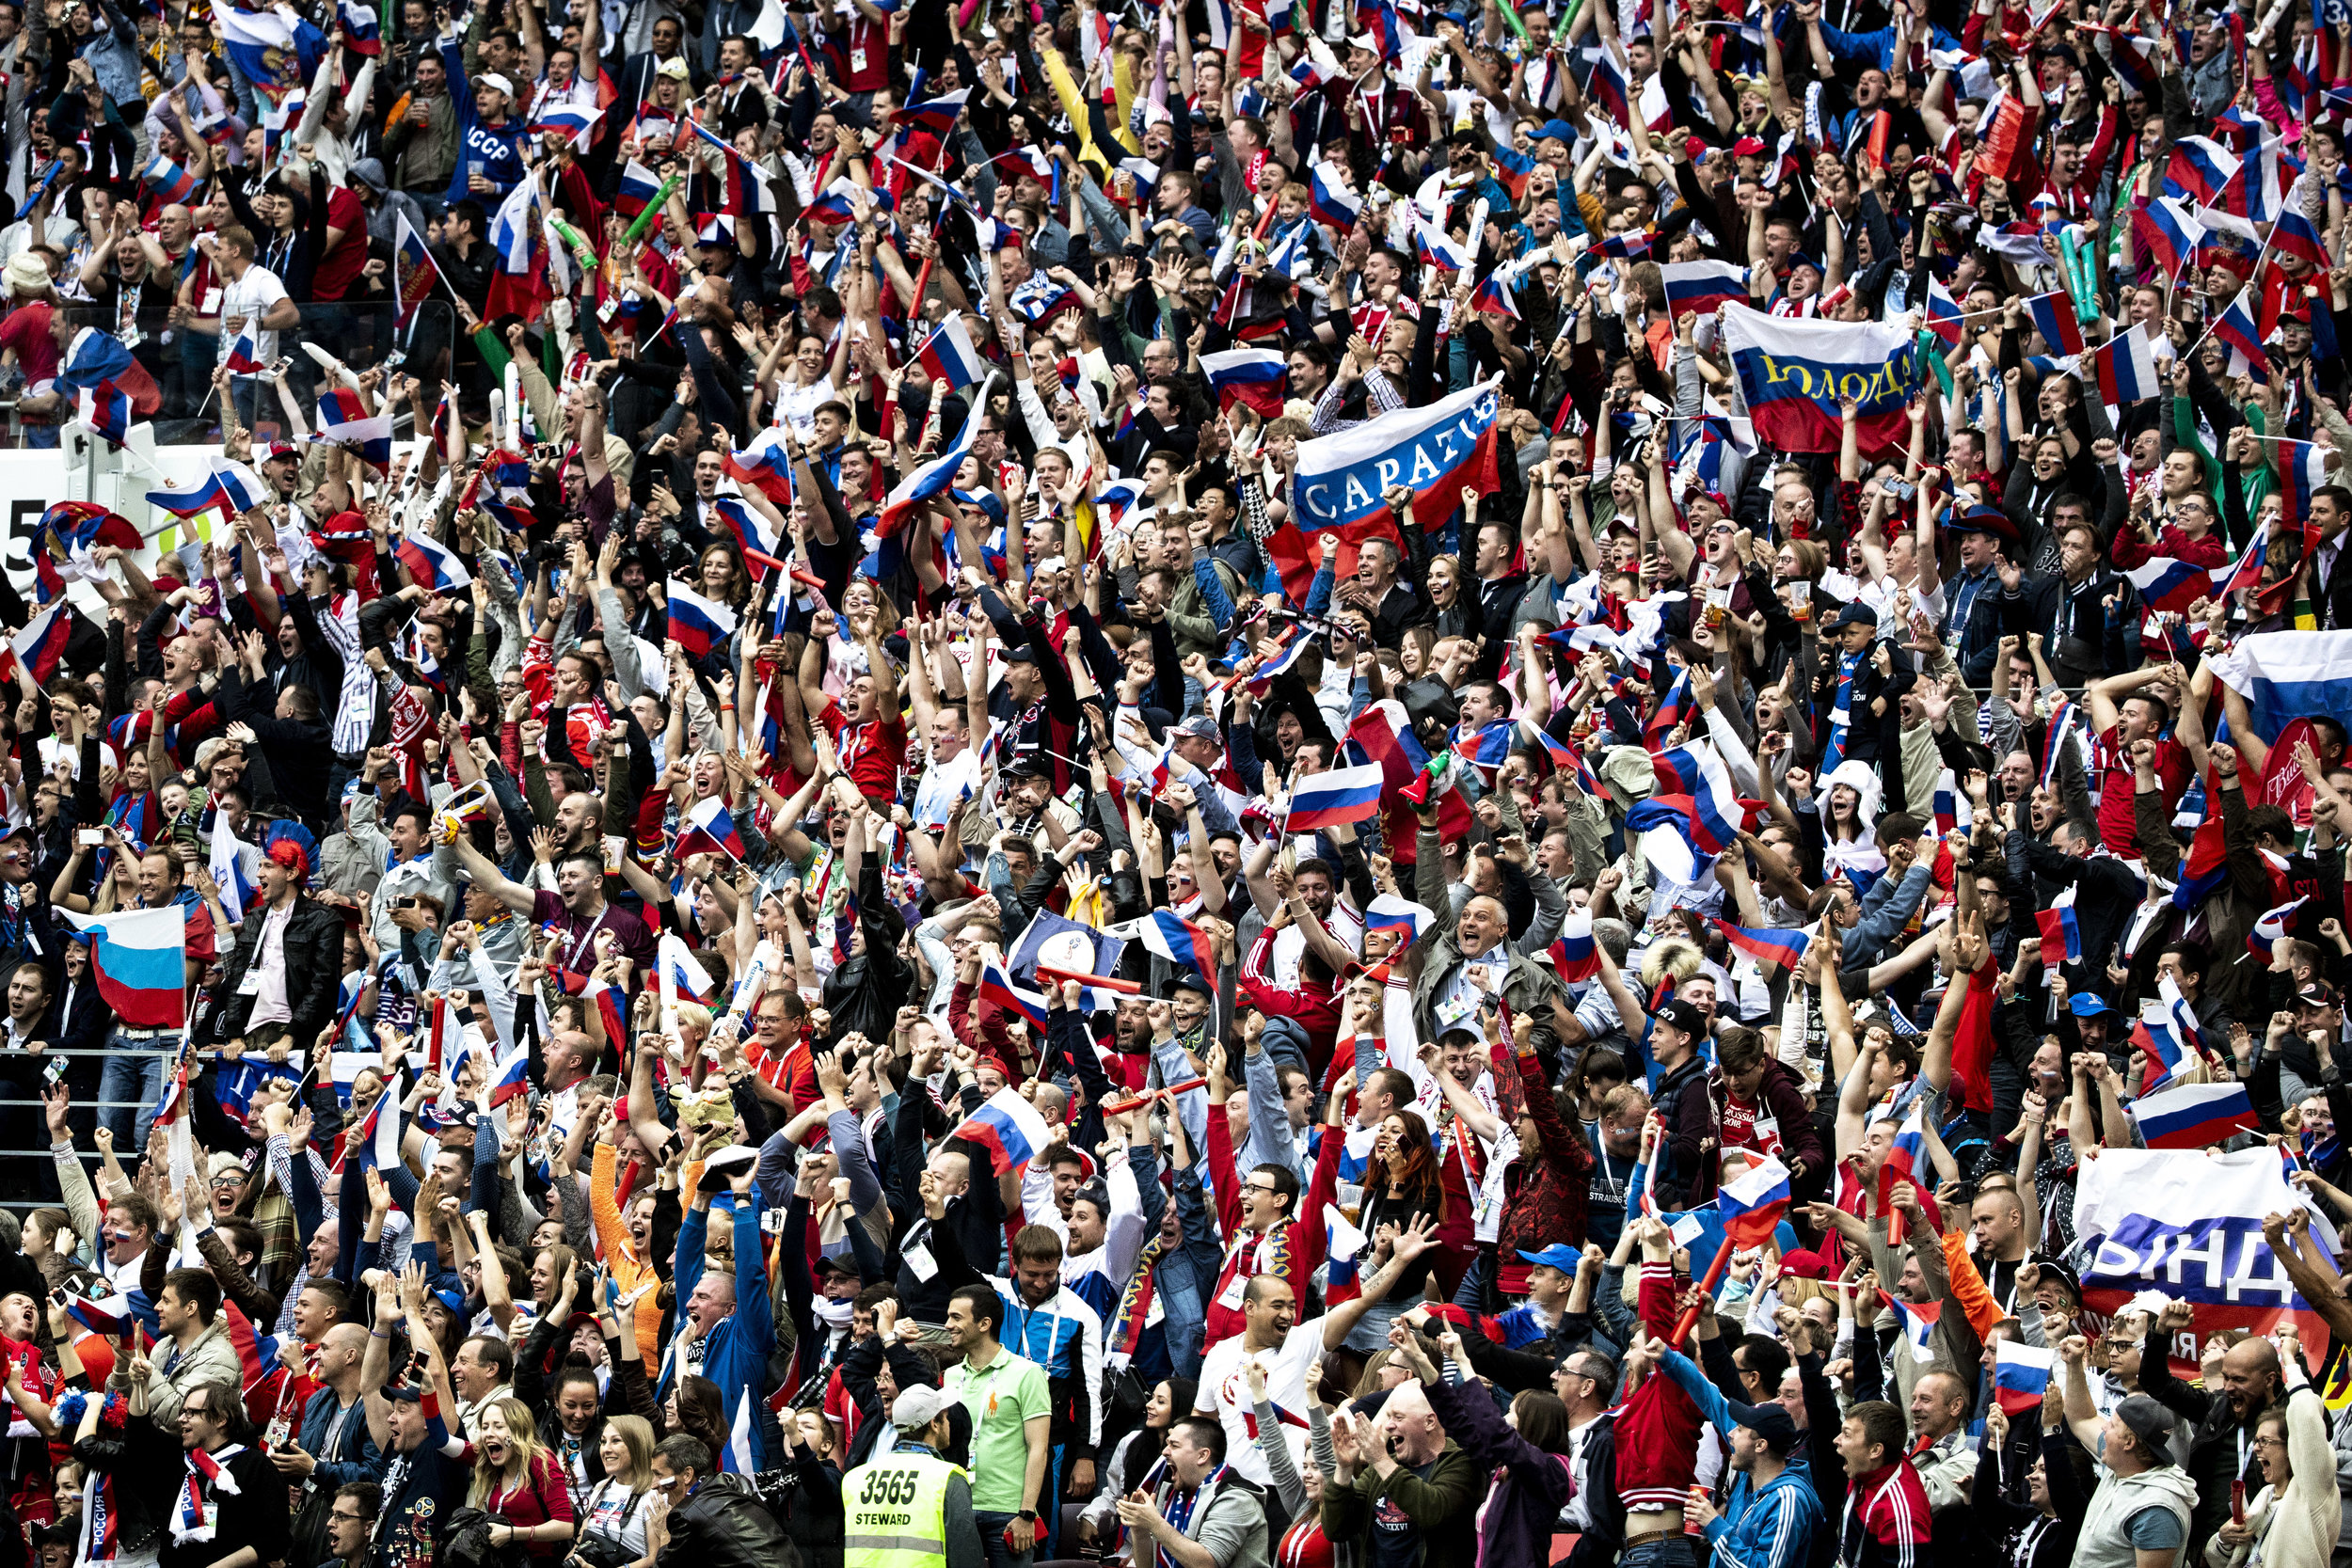  Russian fans celebrate their team's second goal against Saudi Arabia in the World Cup opening game in Moscow 